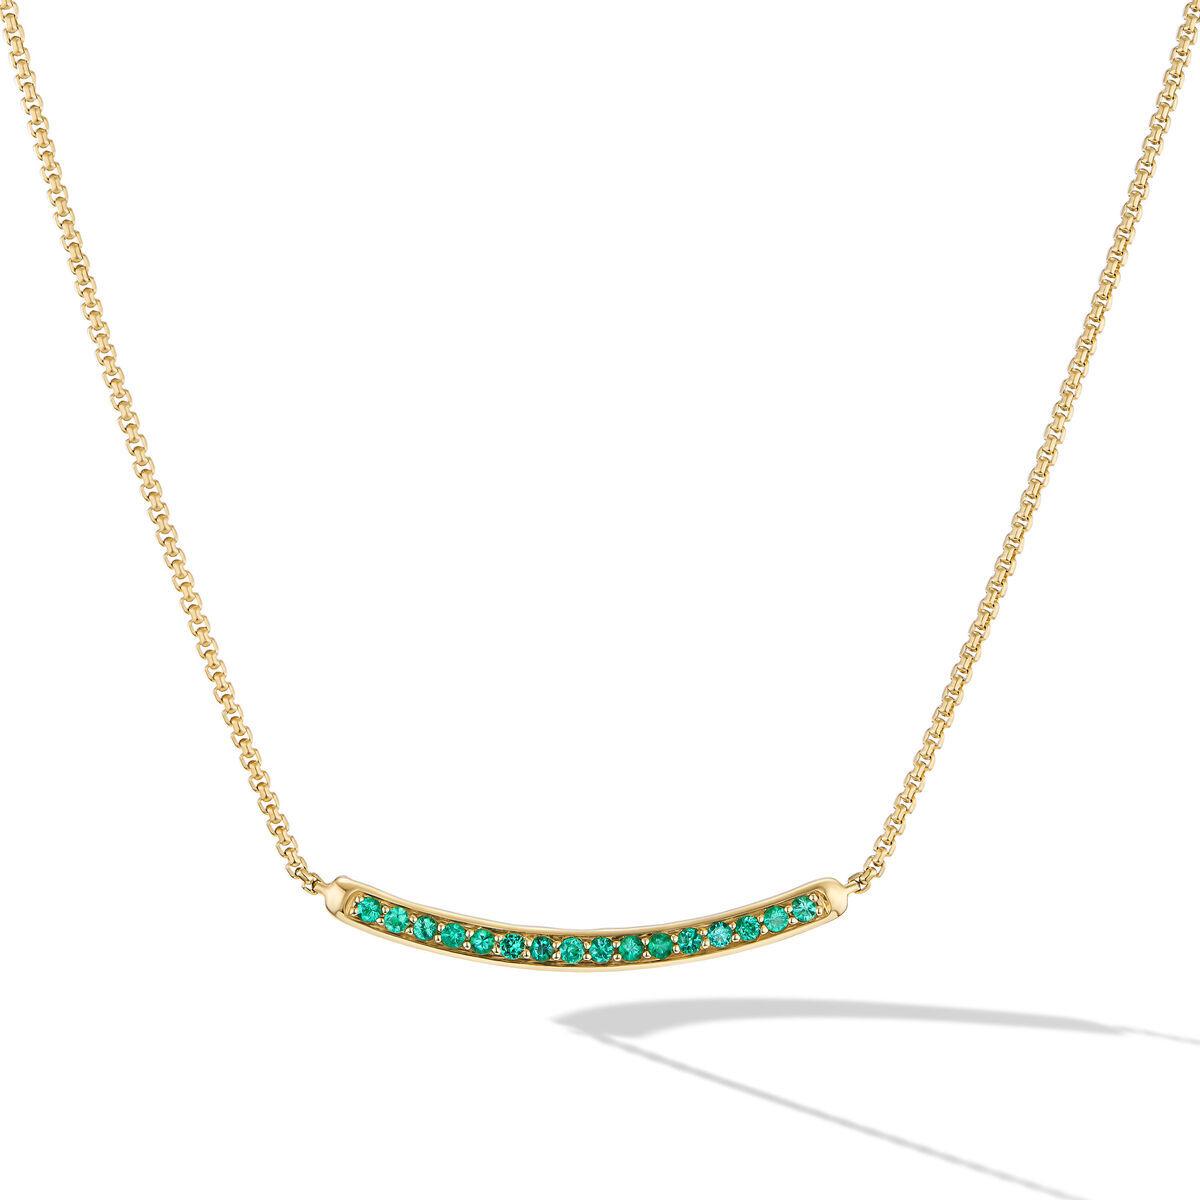 David Yurman Petite Pavé Bar Necklace in 18K Yellow Gold with Emeralds